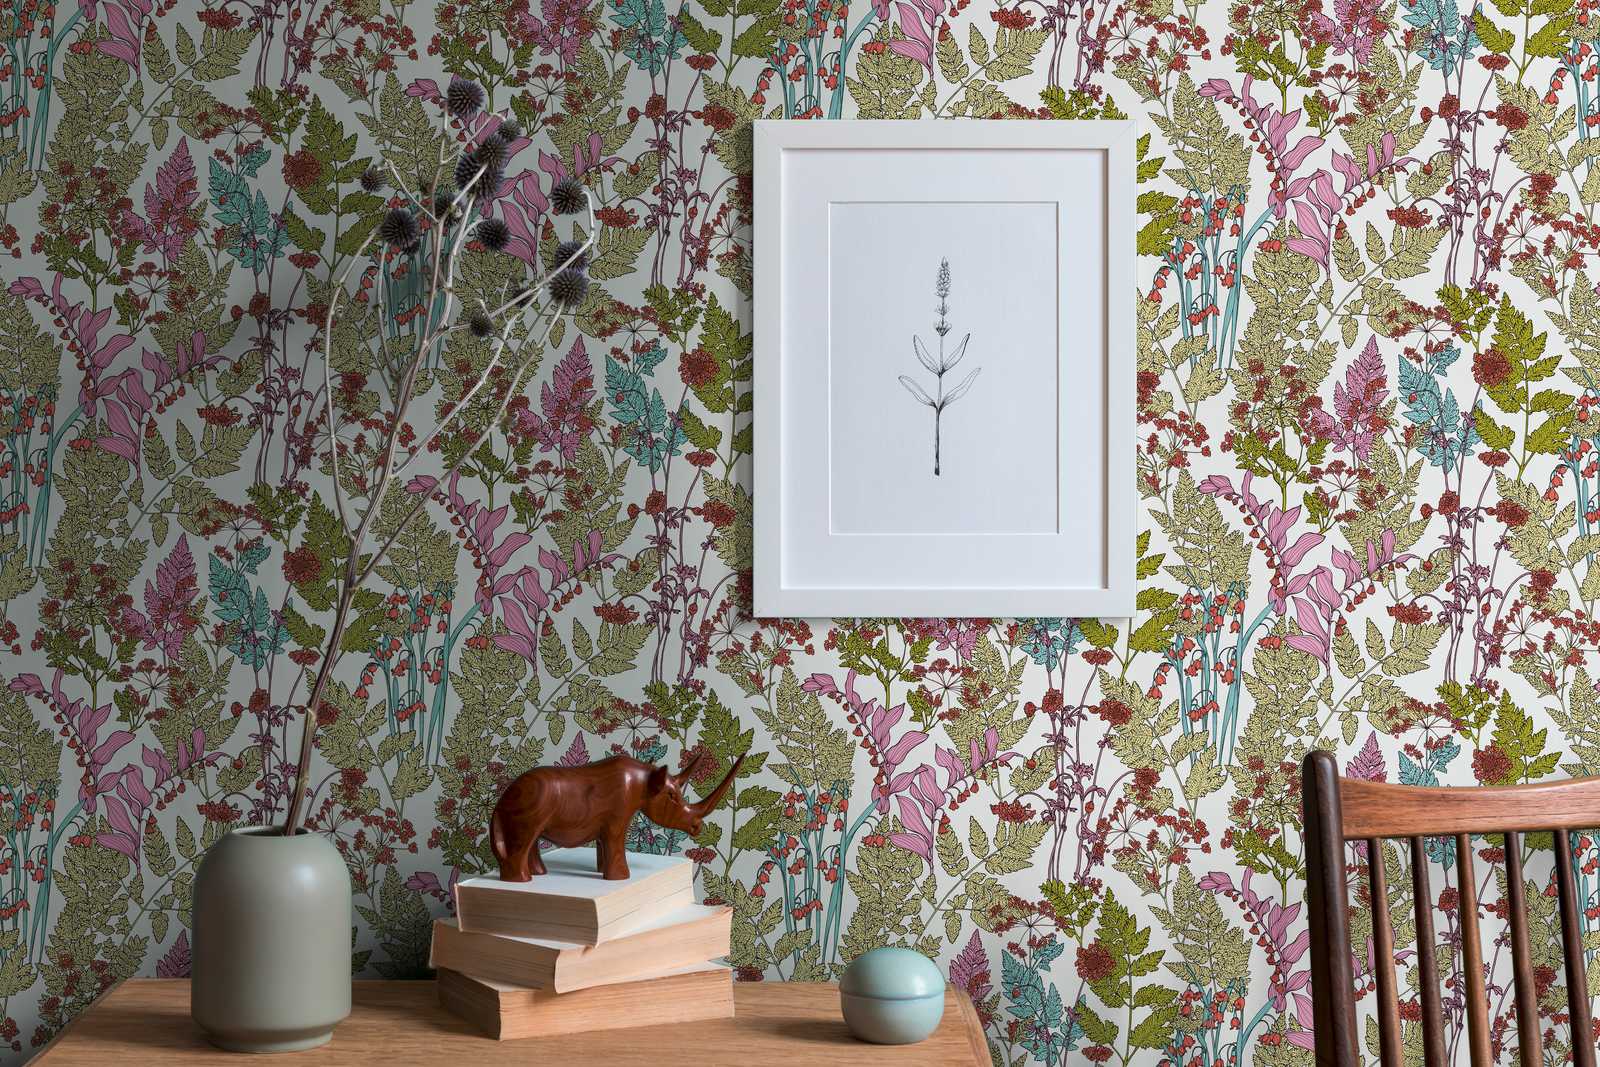             wallpaper leaves & flowers design in modern botanical style - colourful, green, blue
        